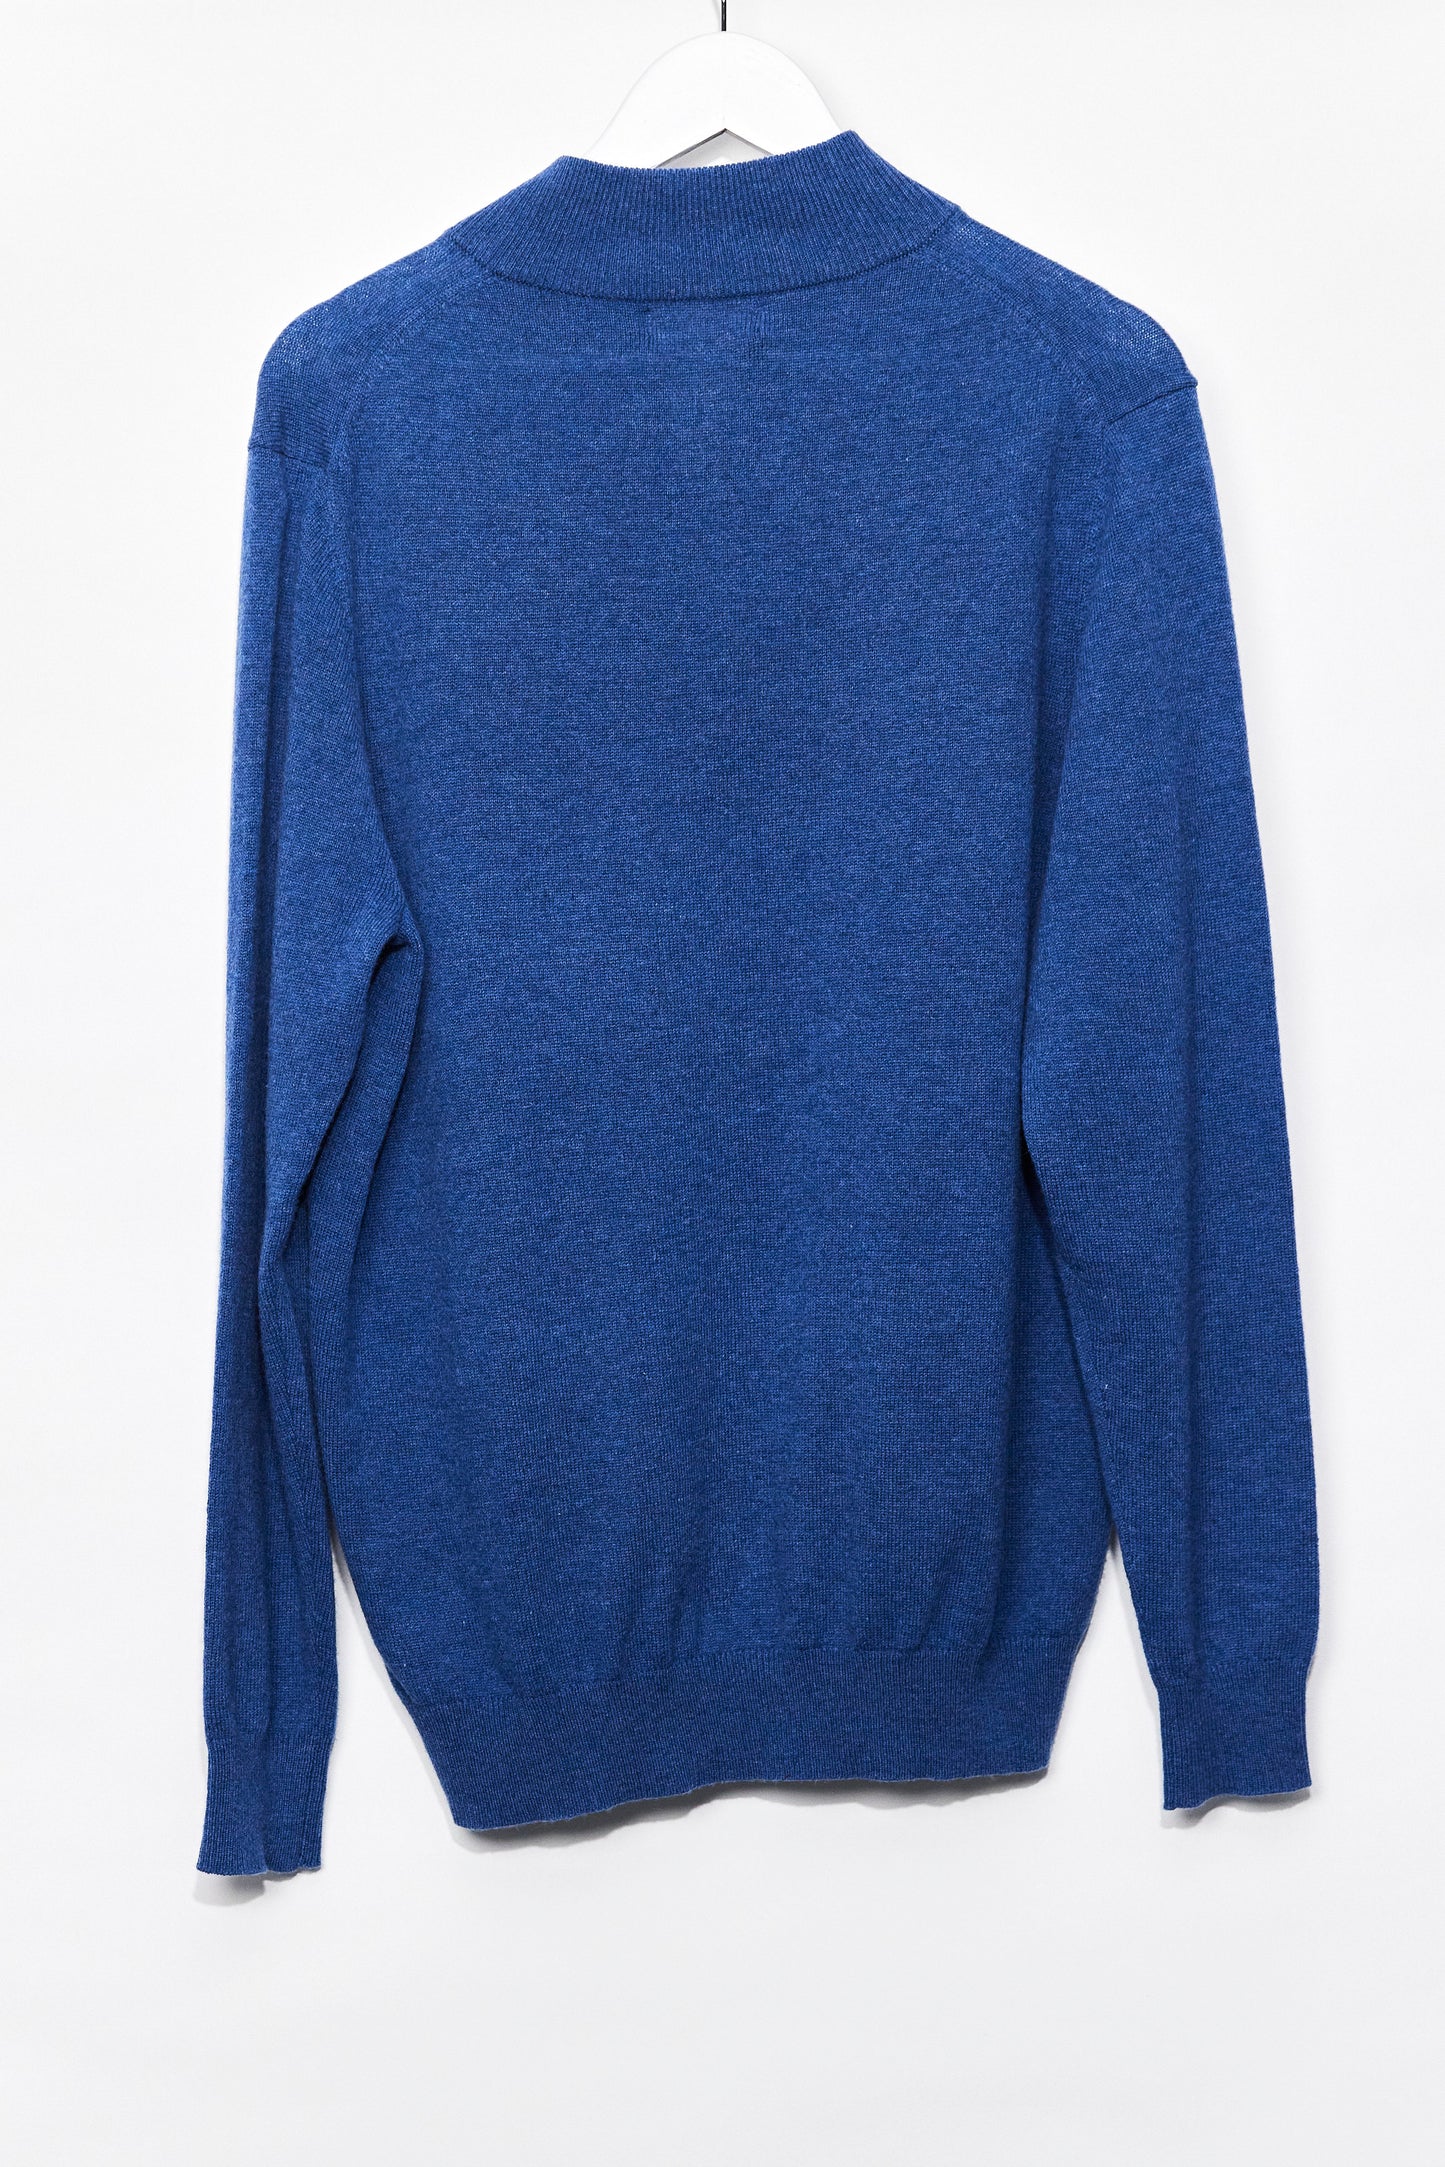 Mens Woolovers Blue Zip neck Jumper size Large